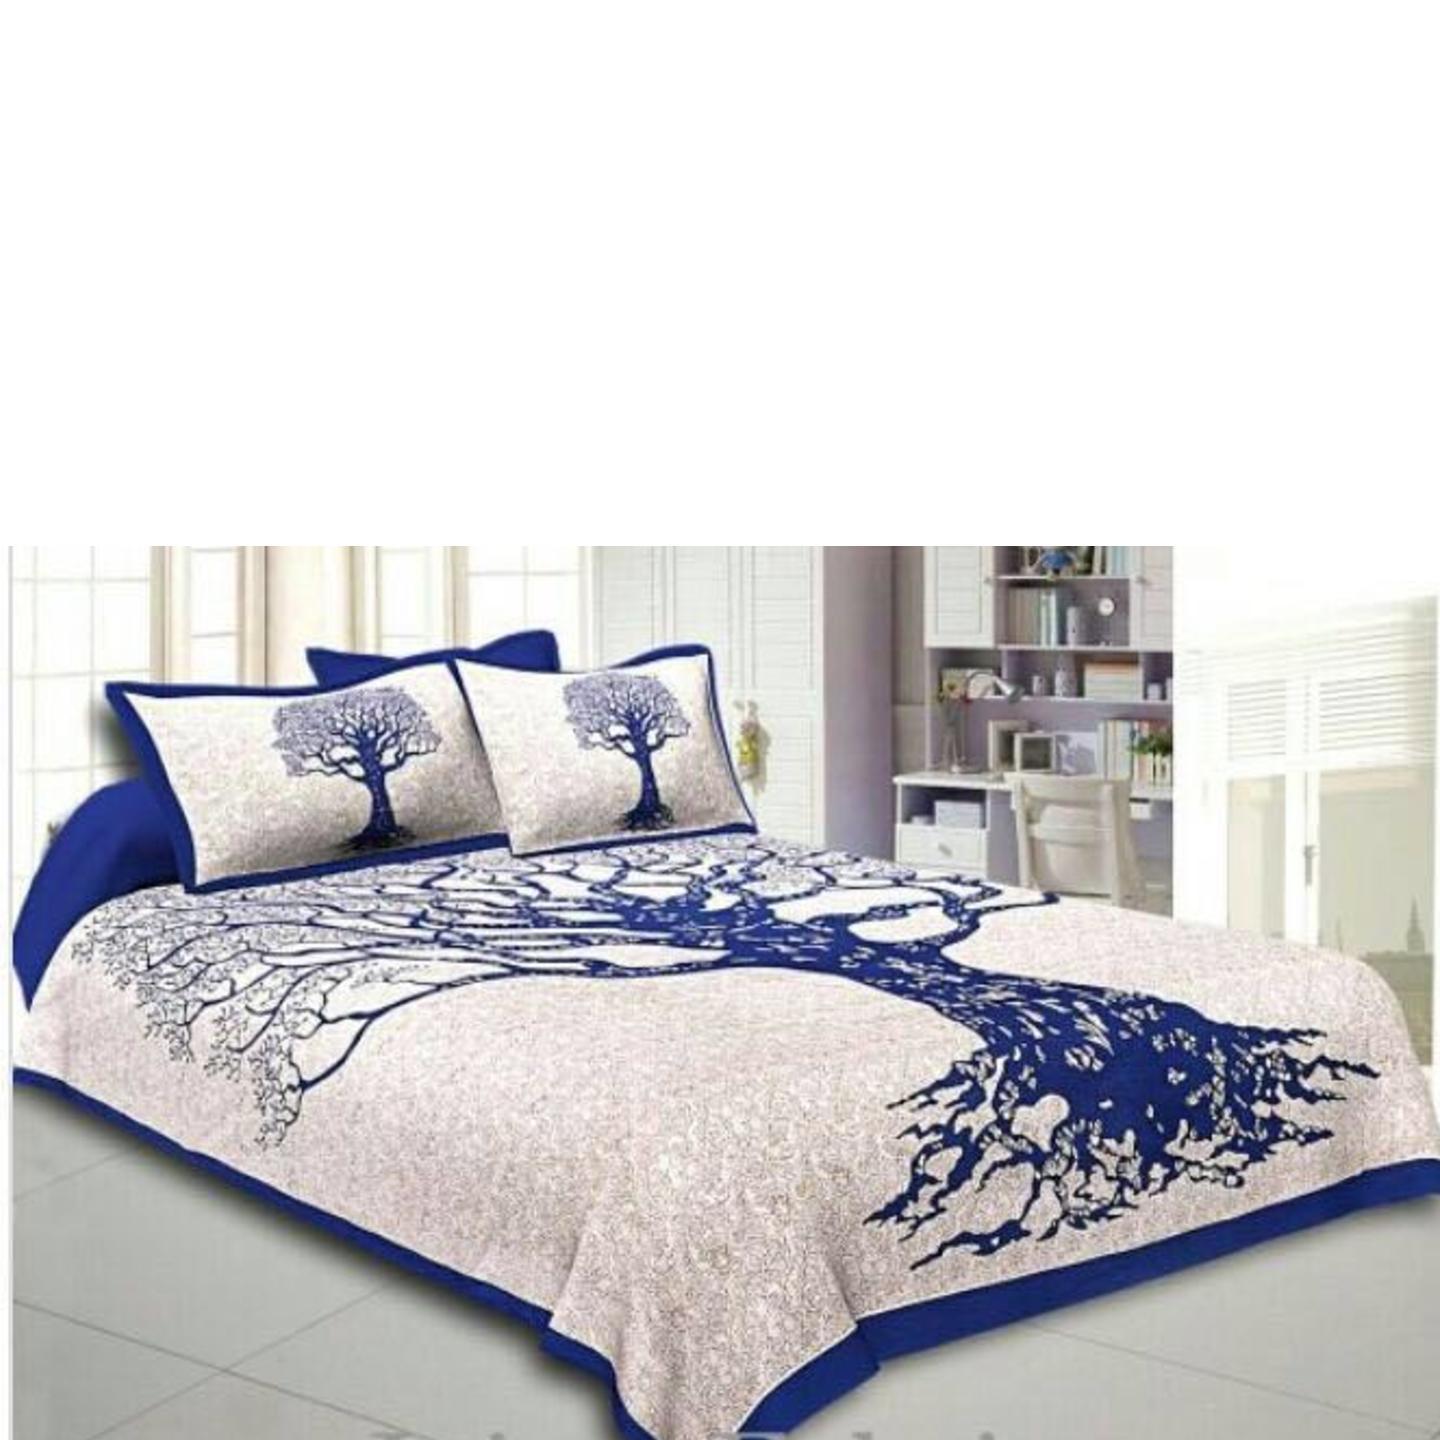 Handtex Home Cotton Rajasthani Jaipuri Tree Printed Double Bed Bedsheet with 2 Pillow Covers 